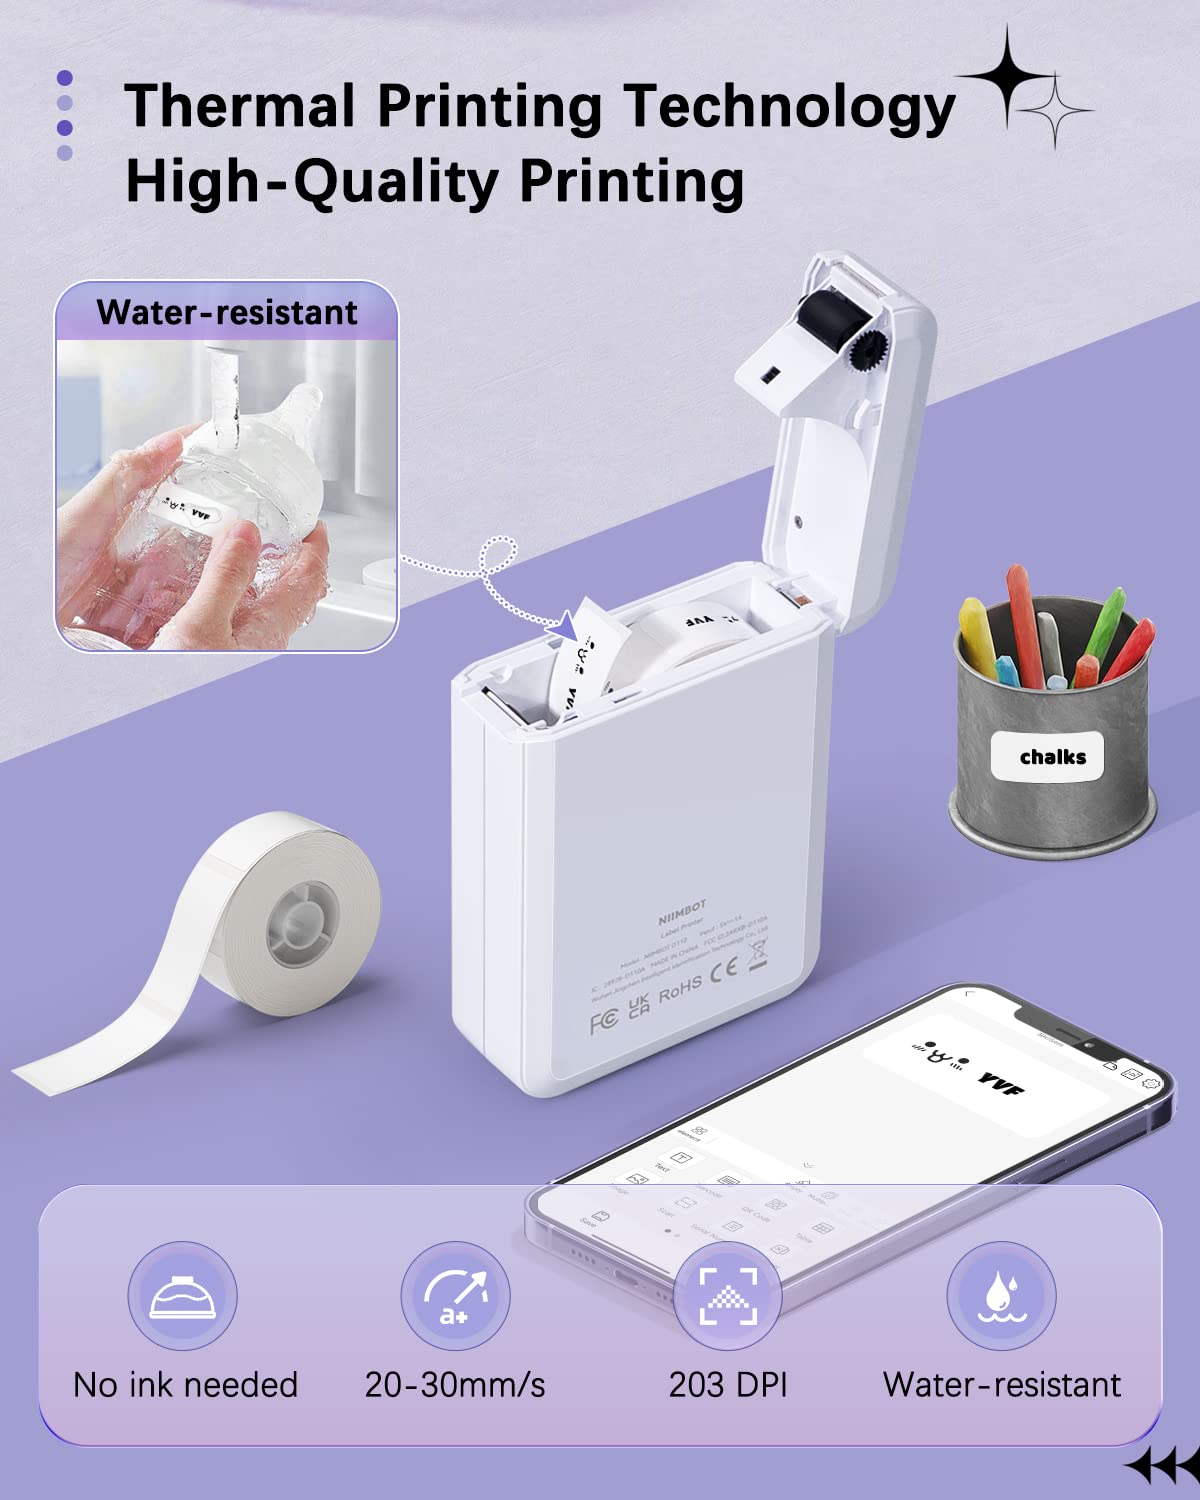  mini handheld color printer (m-brush) wireless bluetooth portable  printer the world's smallest mobile color printer with standard ink  cartridge